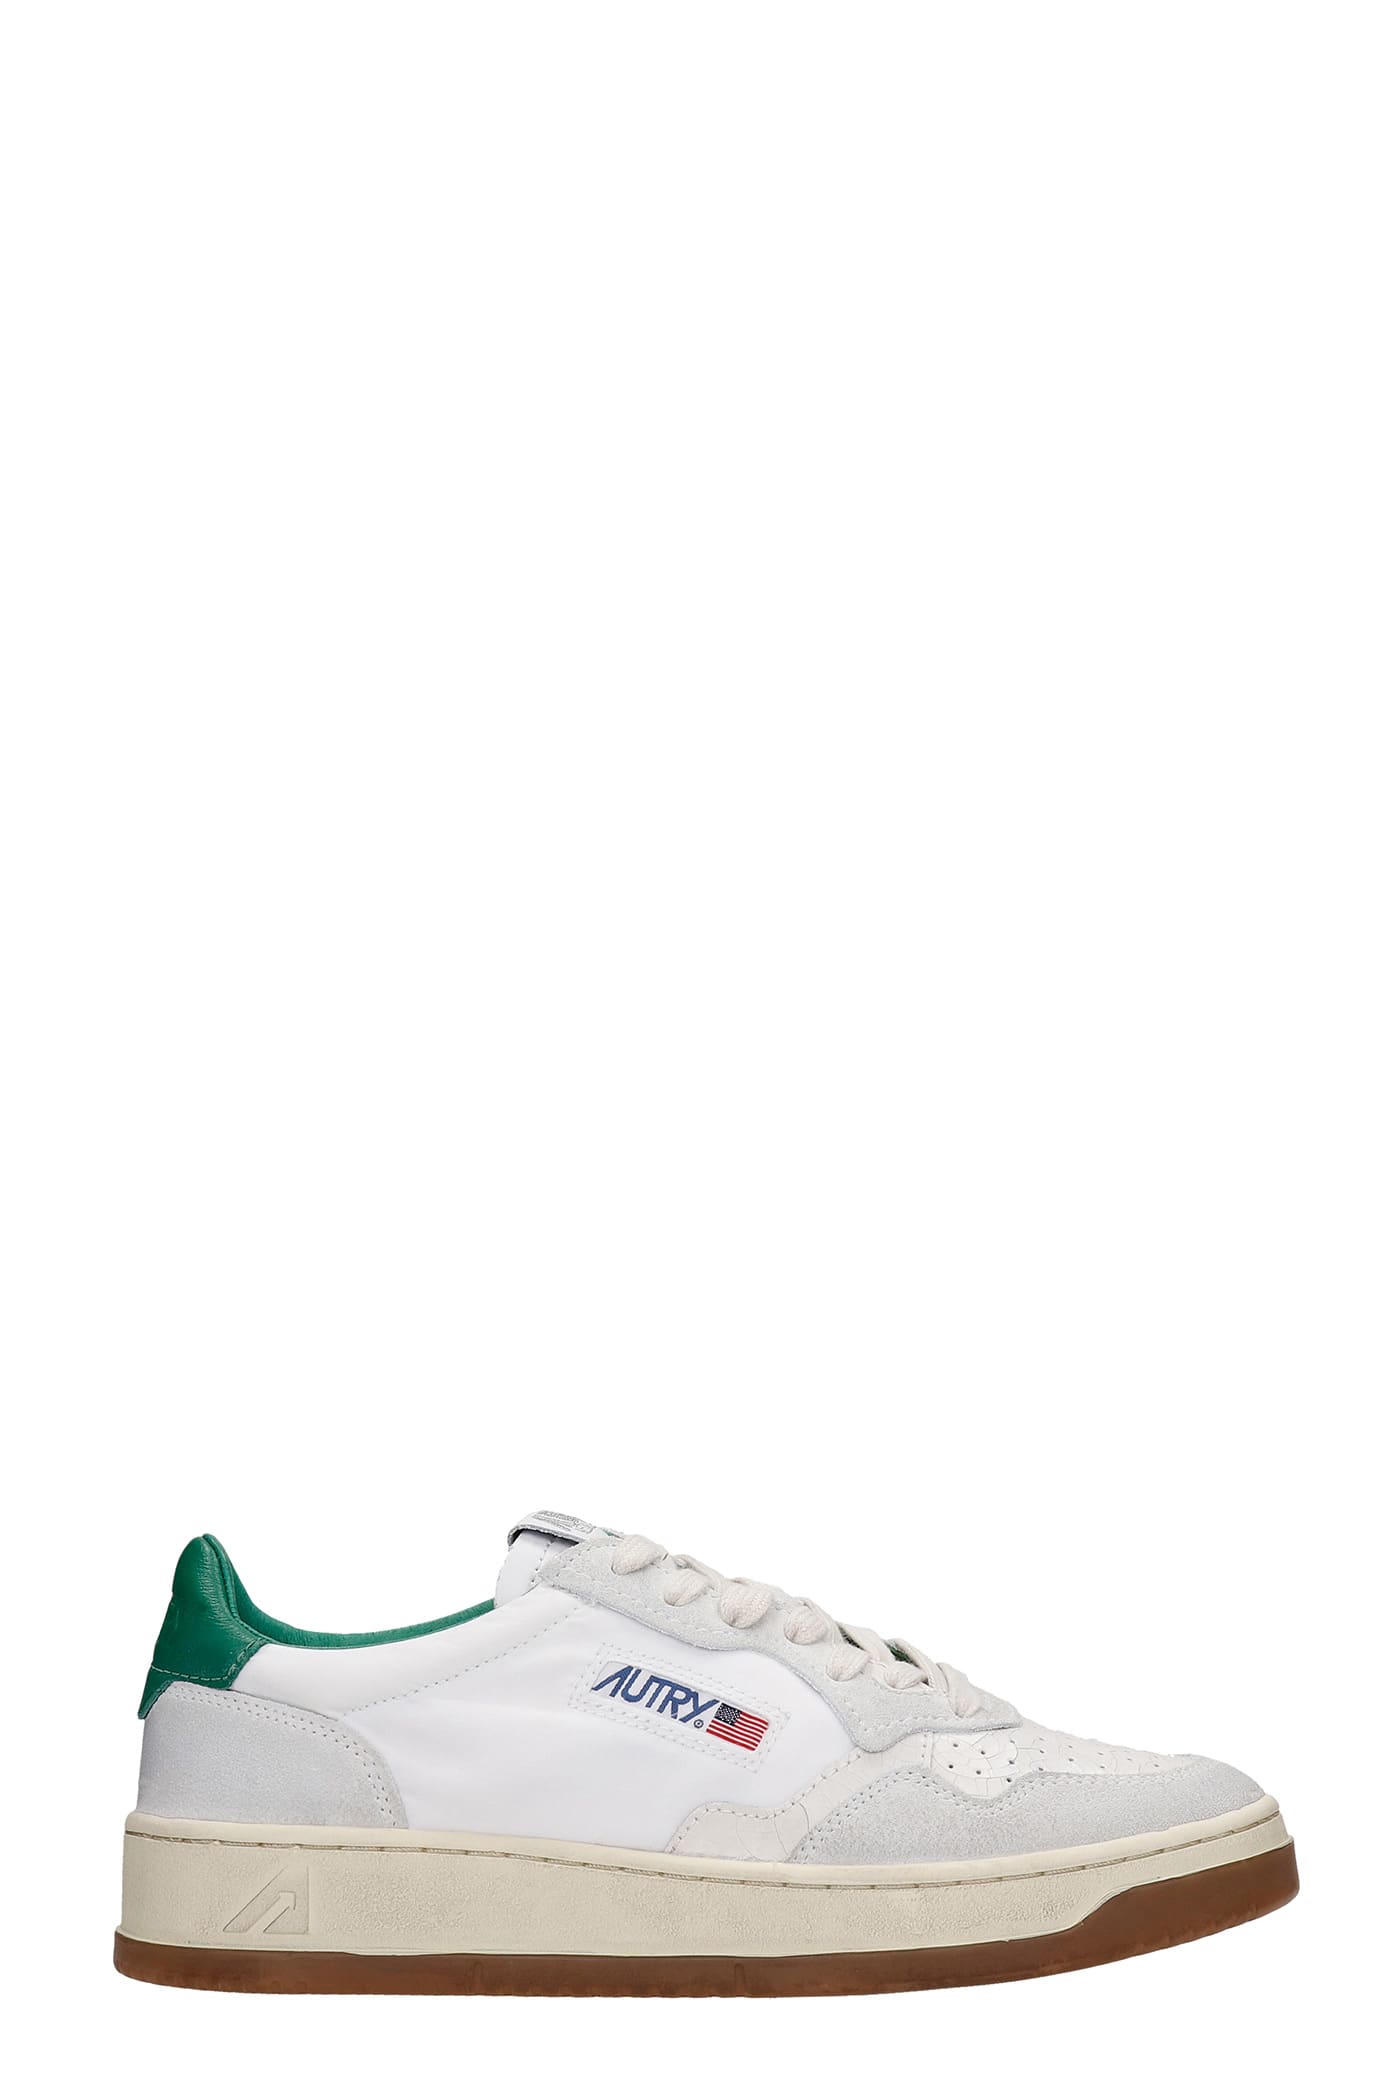 Autry Autry 01 Sneakers In White Synthetic Fibers